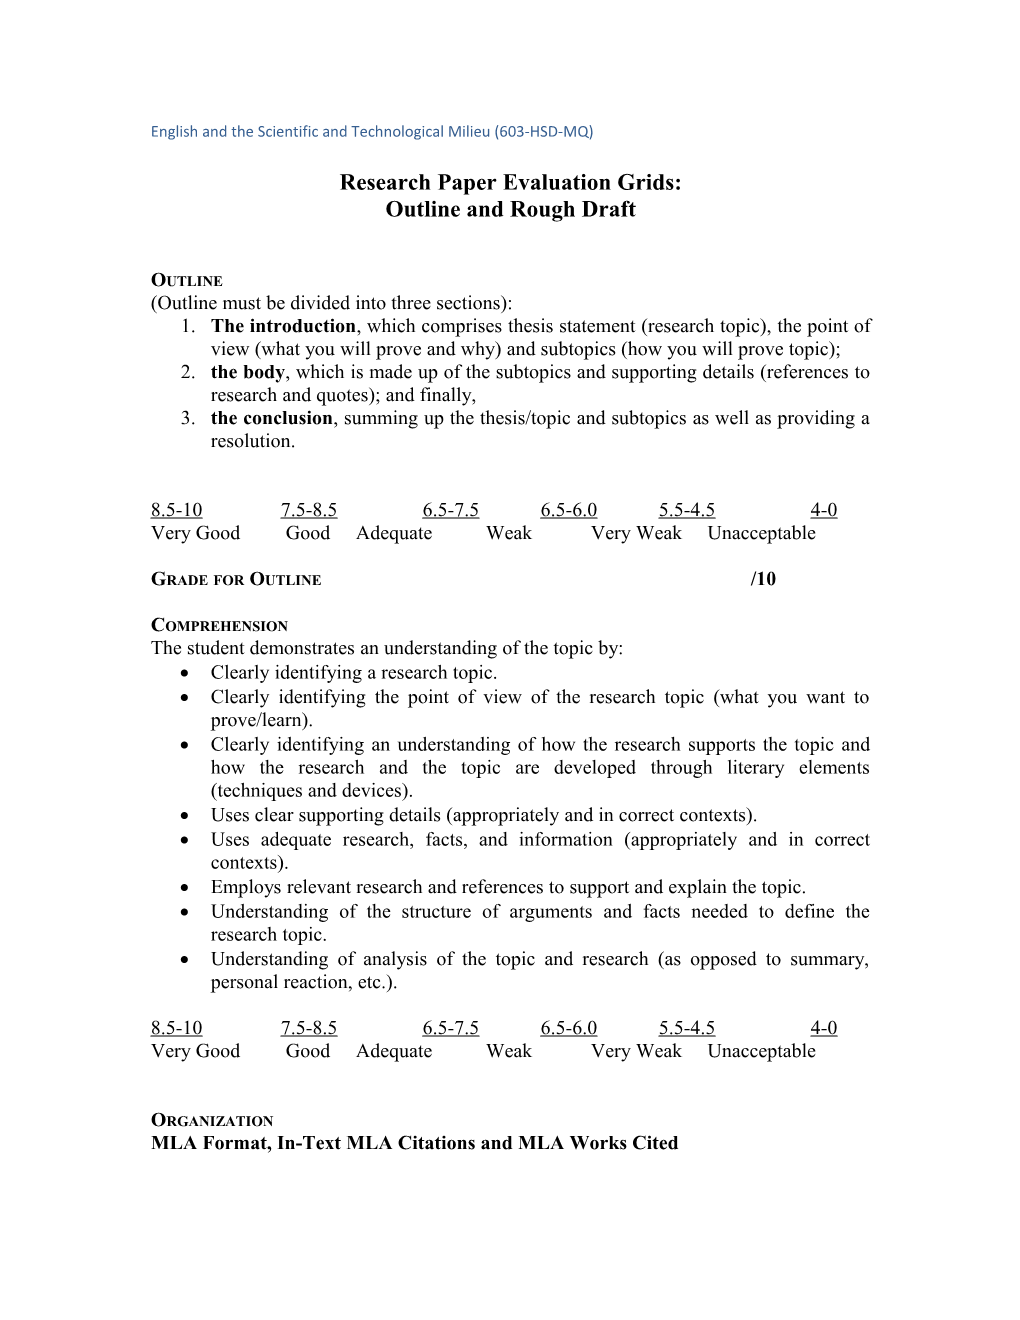 Research Paper Evaluation Grid: Outline and Rough Draft